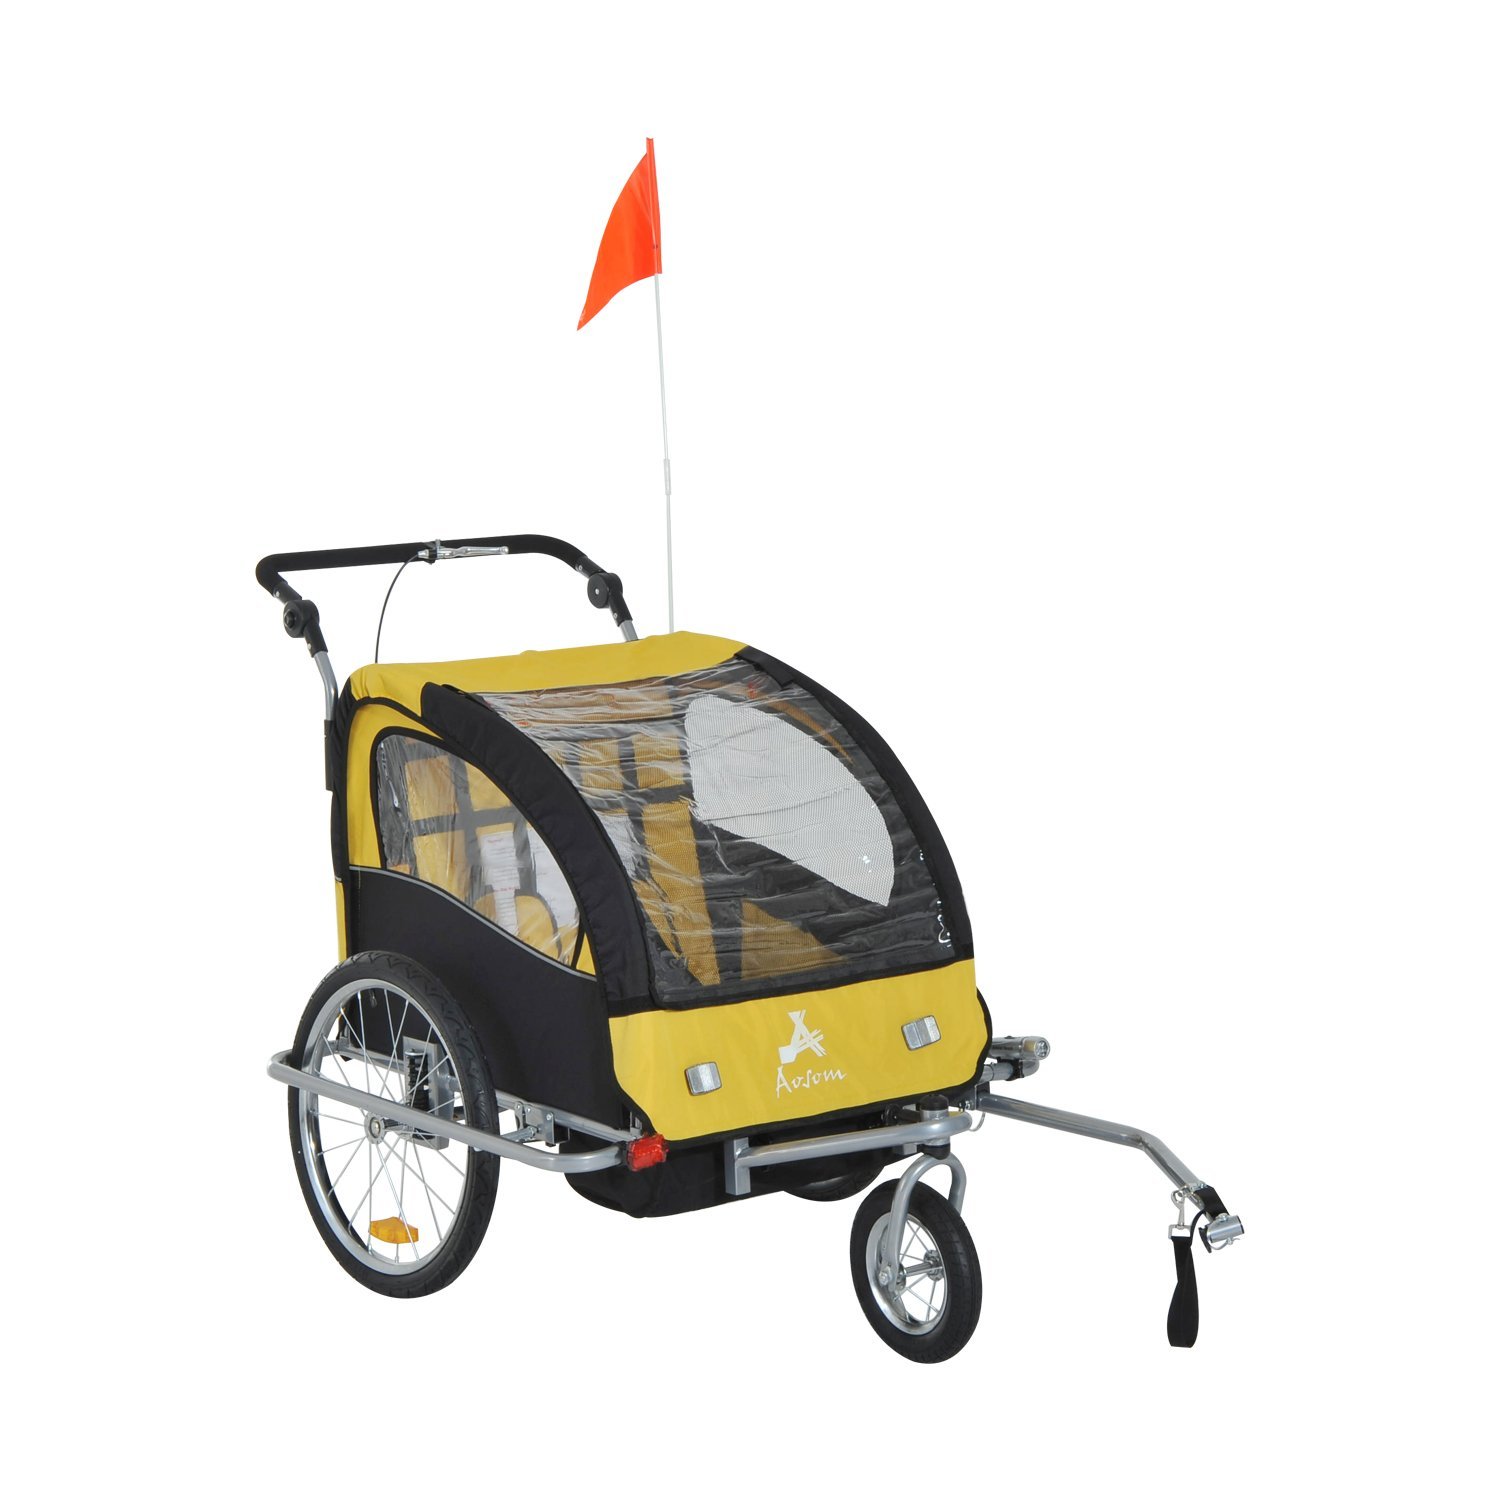 Aosom Elite II 2-In-1 Double Child Two-Wheel Bicycle Trailer, Stroller and Jogger with 2 Safety Harnesses - Yellow / Black